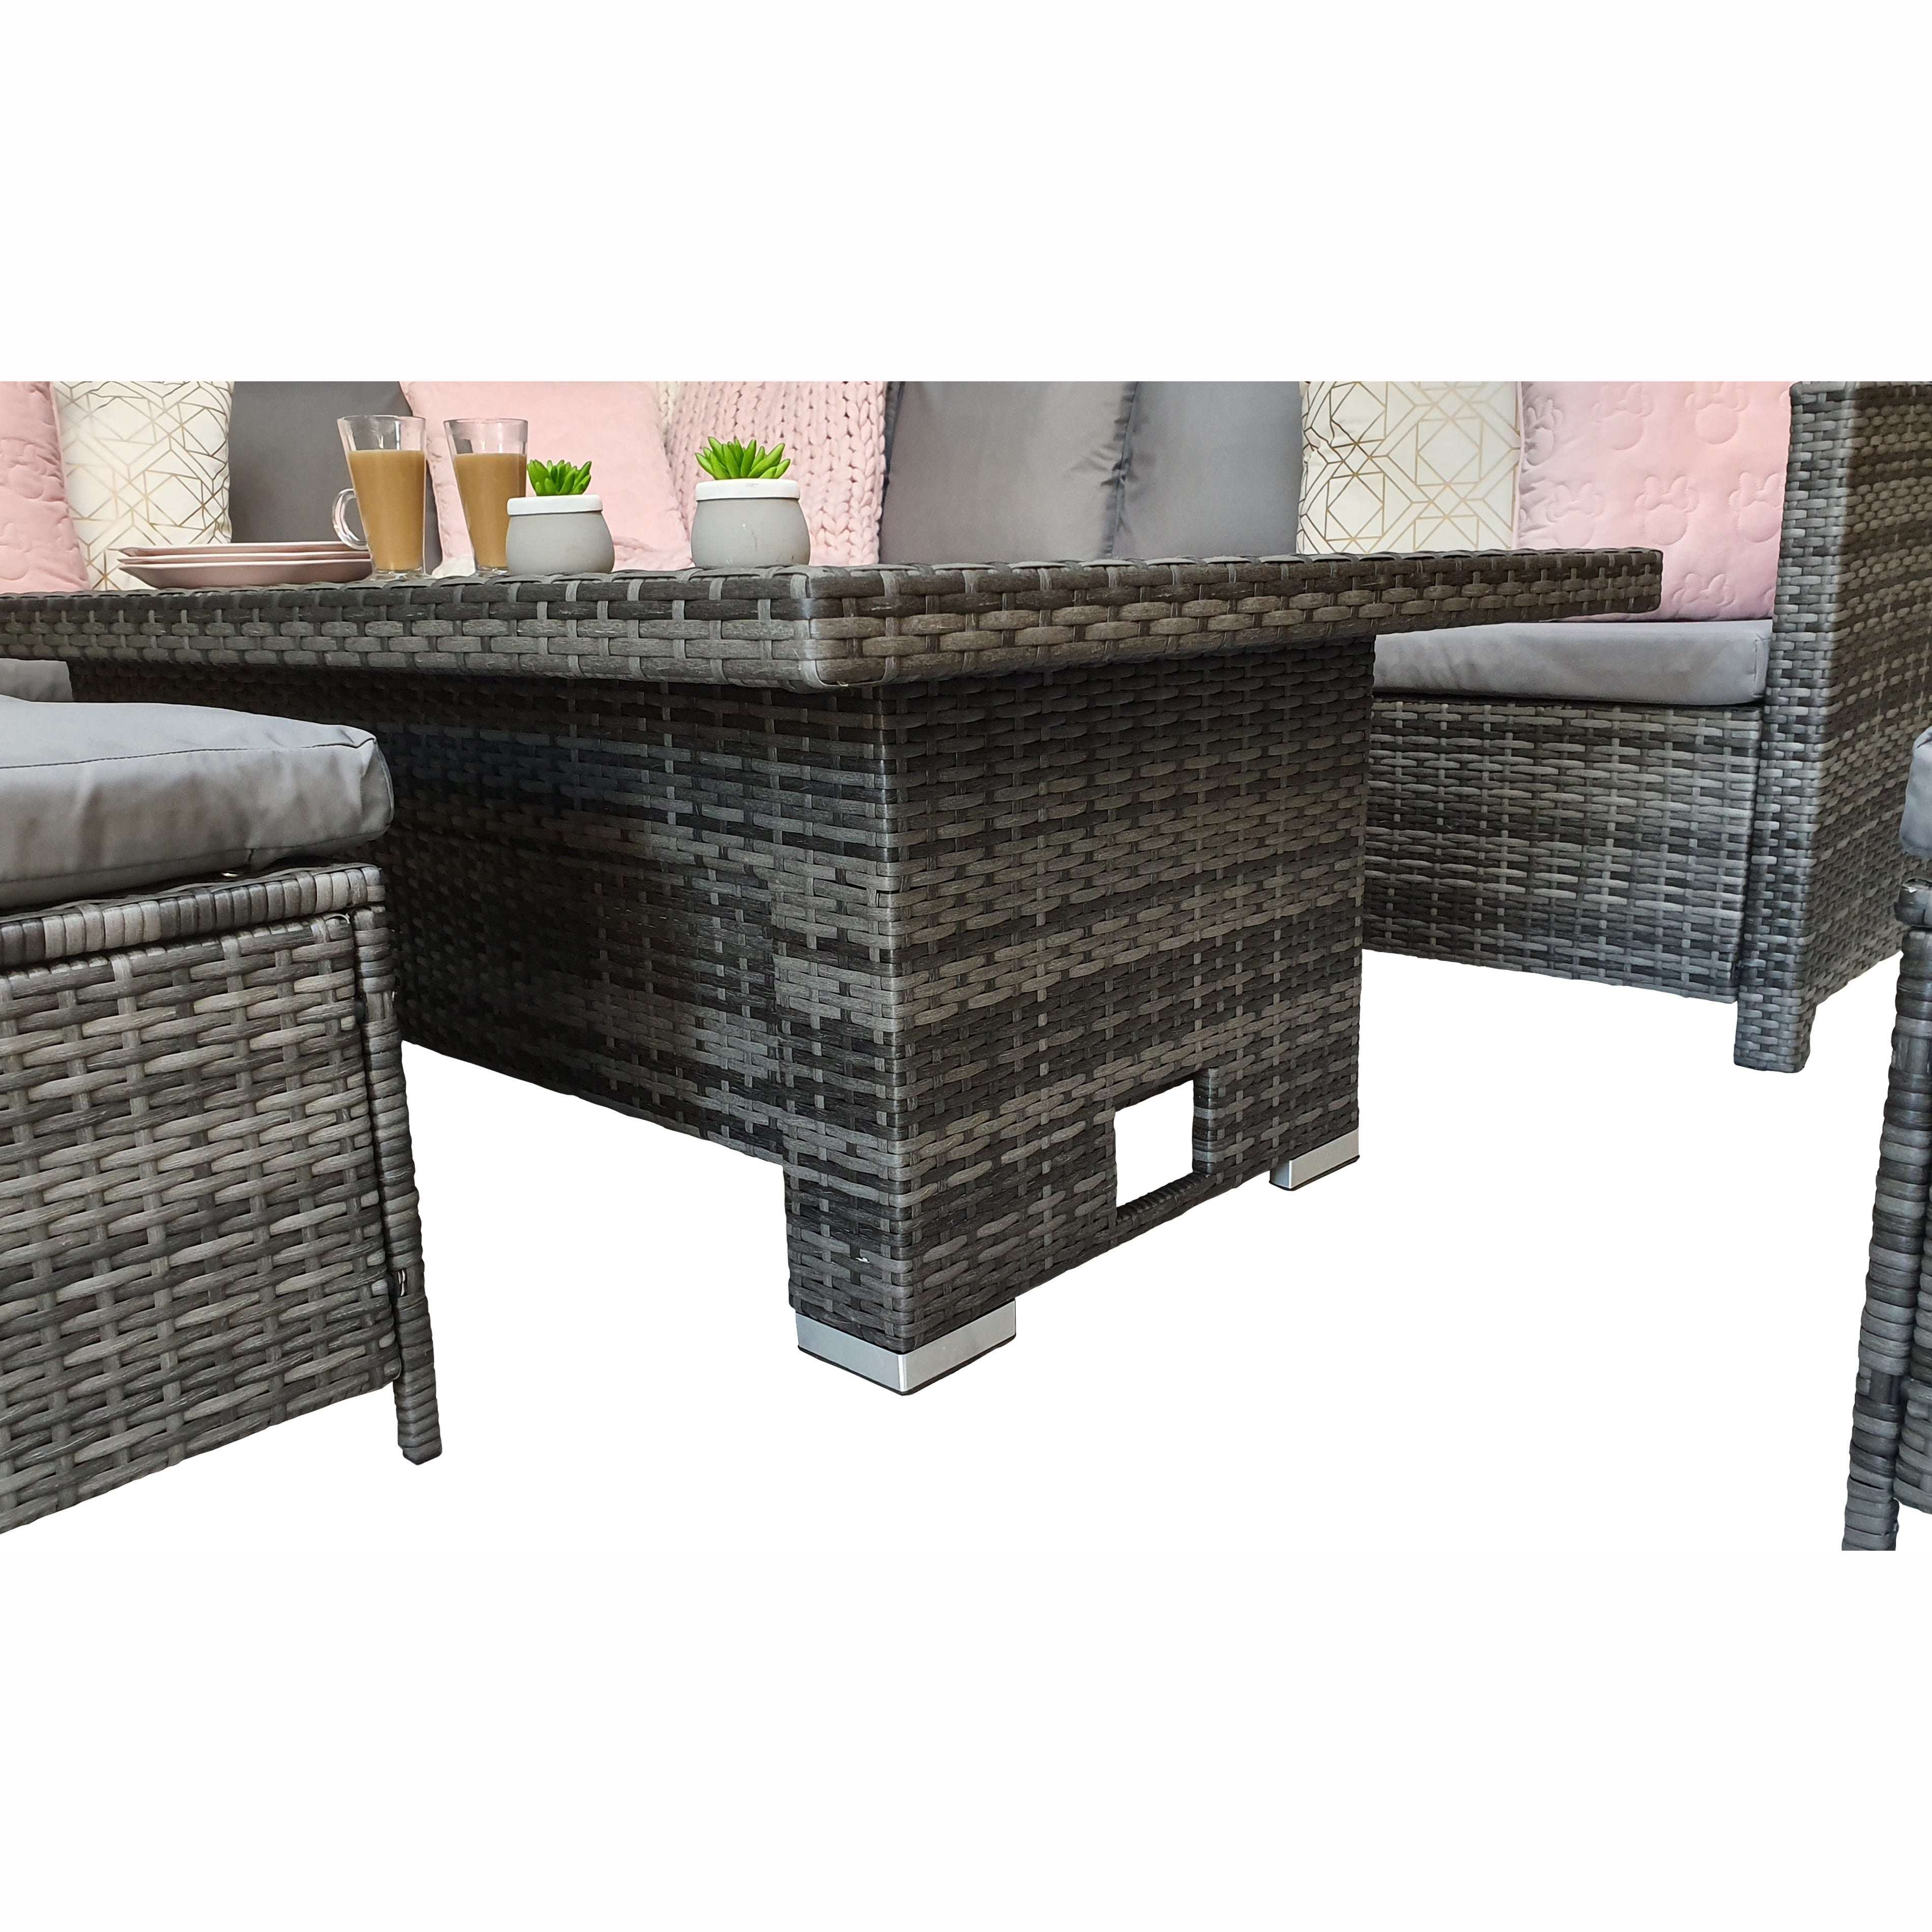 Exceptional Garden:Signature Weave Charlotte Corner Dining Set with Lifting Table